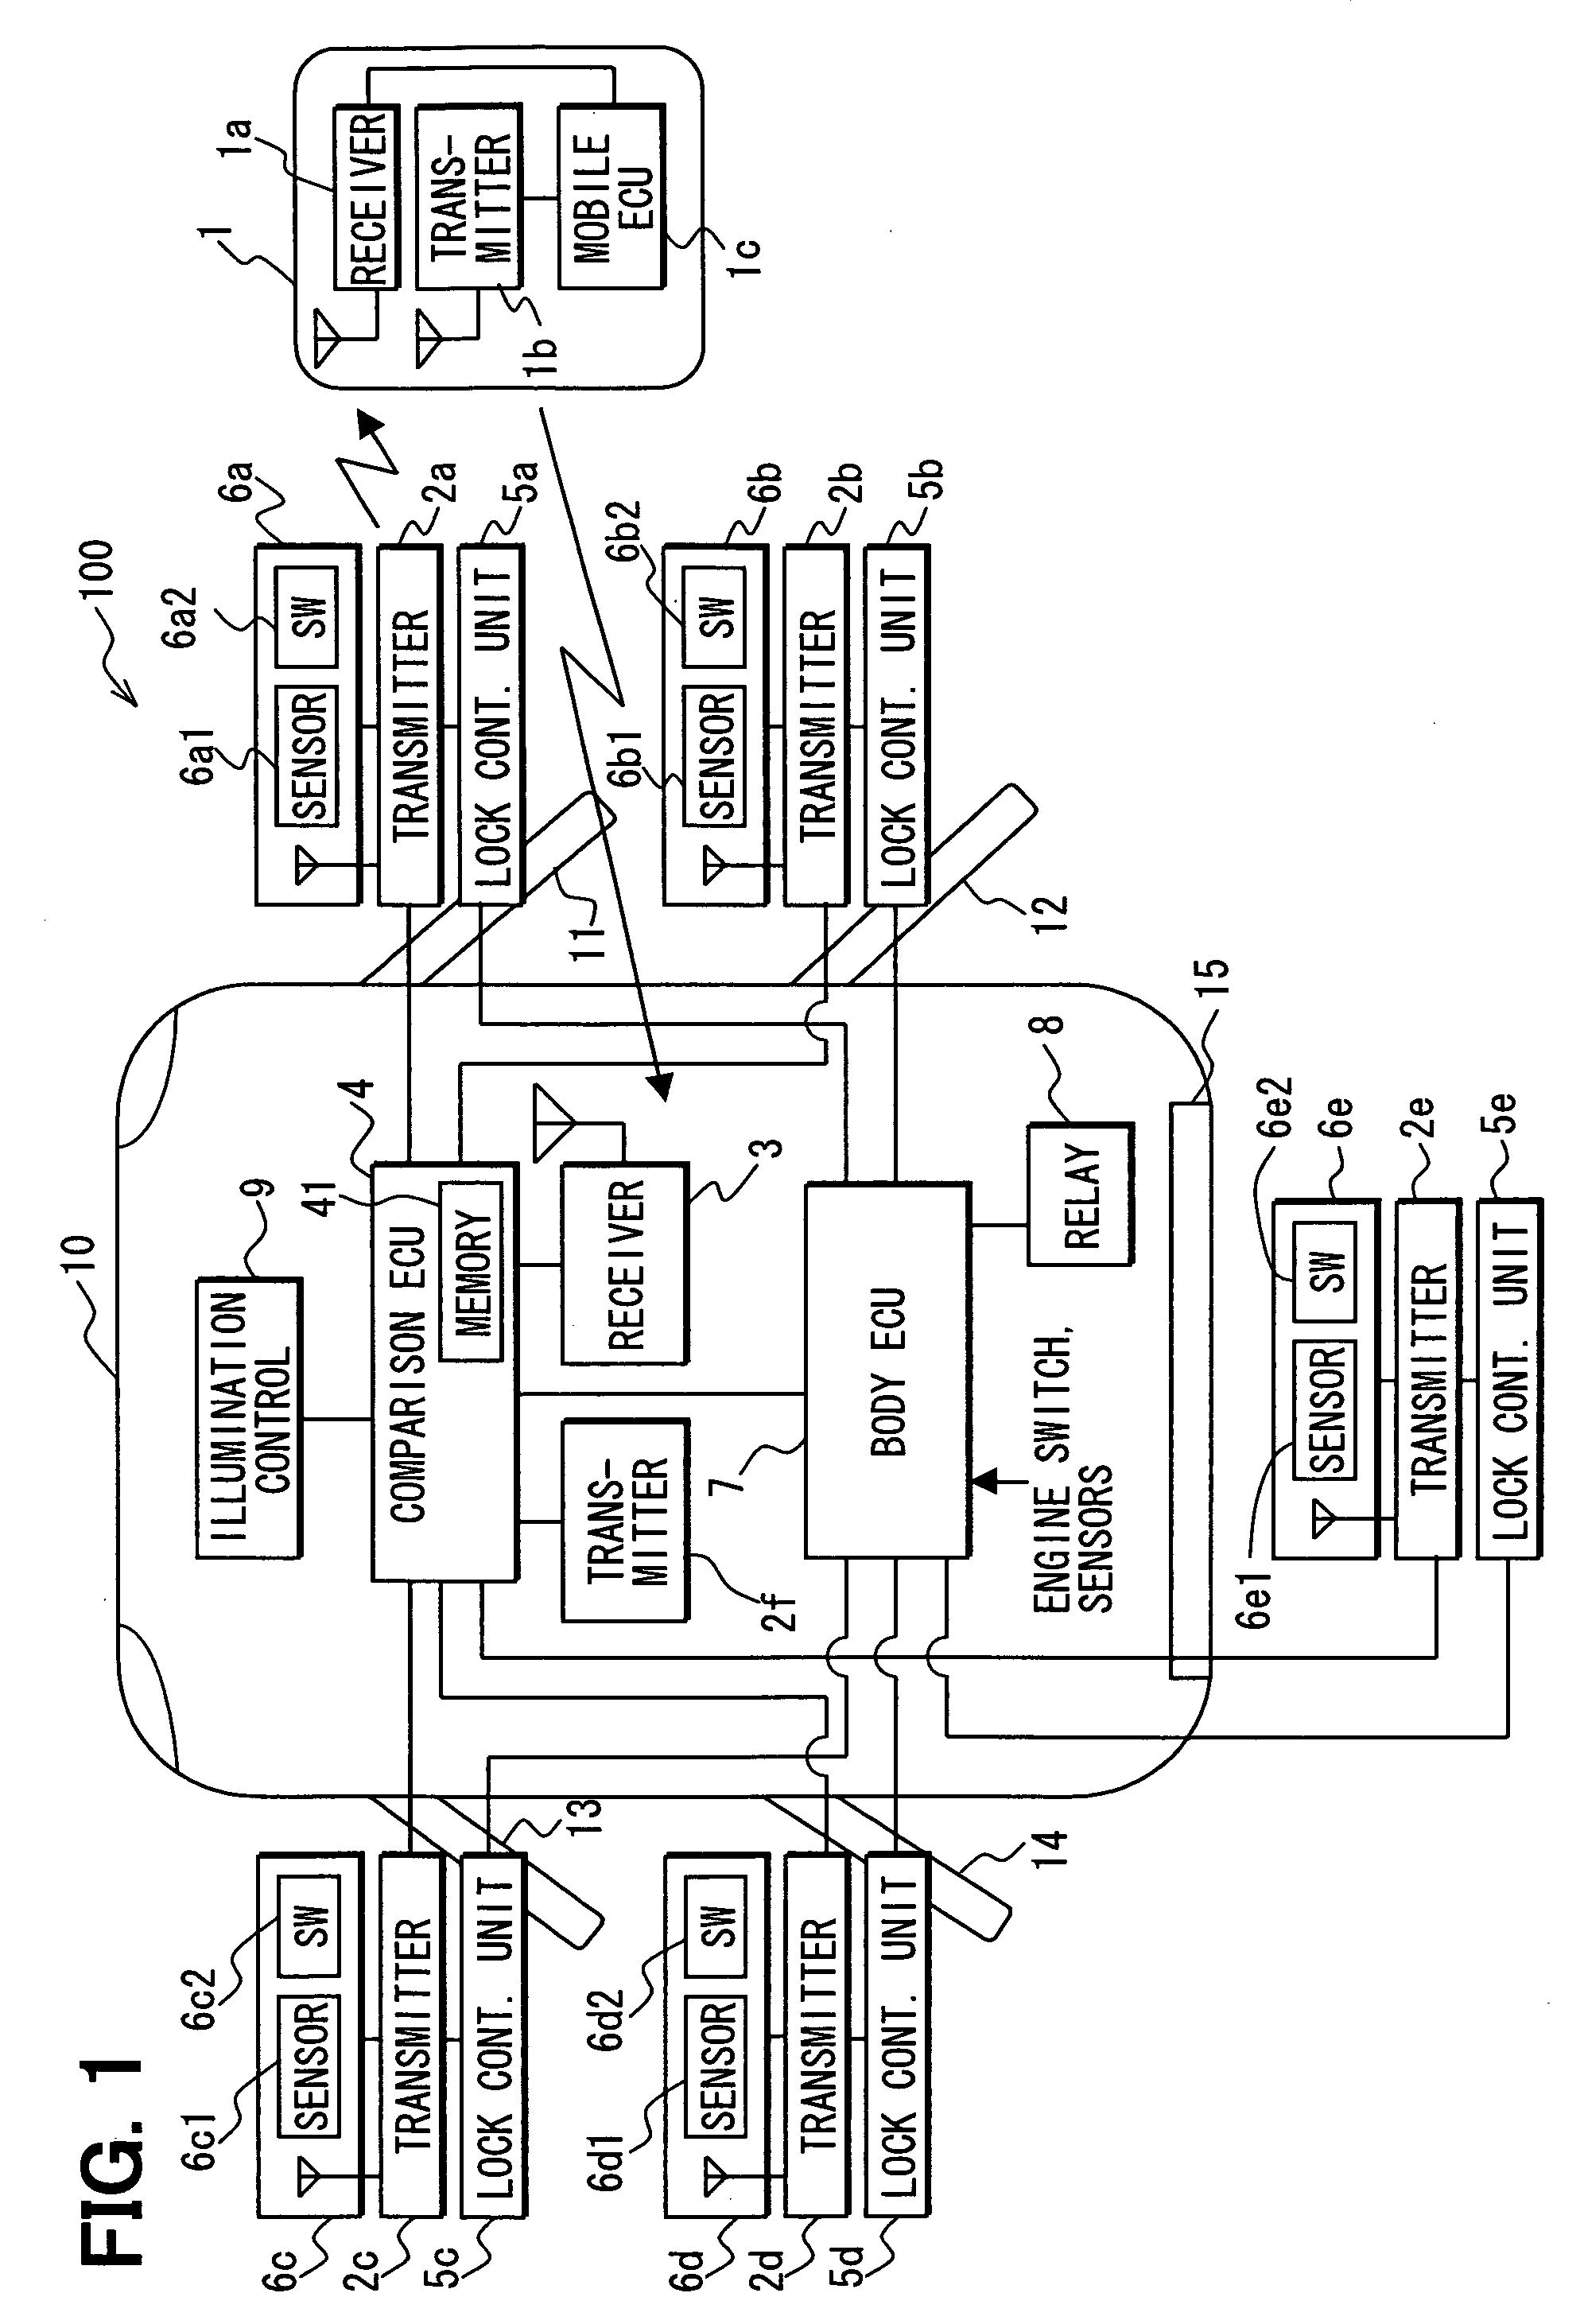 On-board illumination controlling system and method